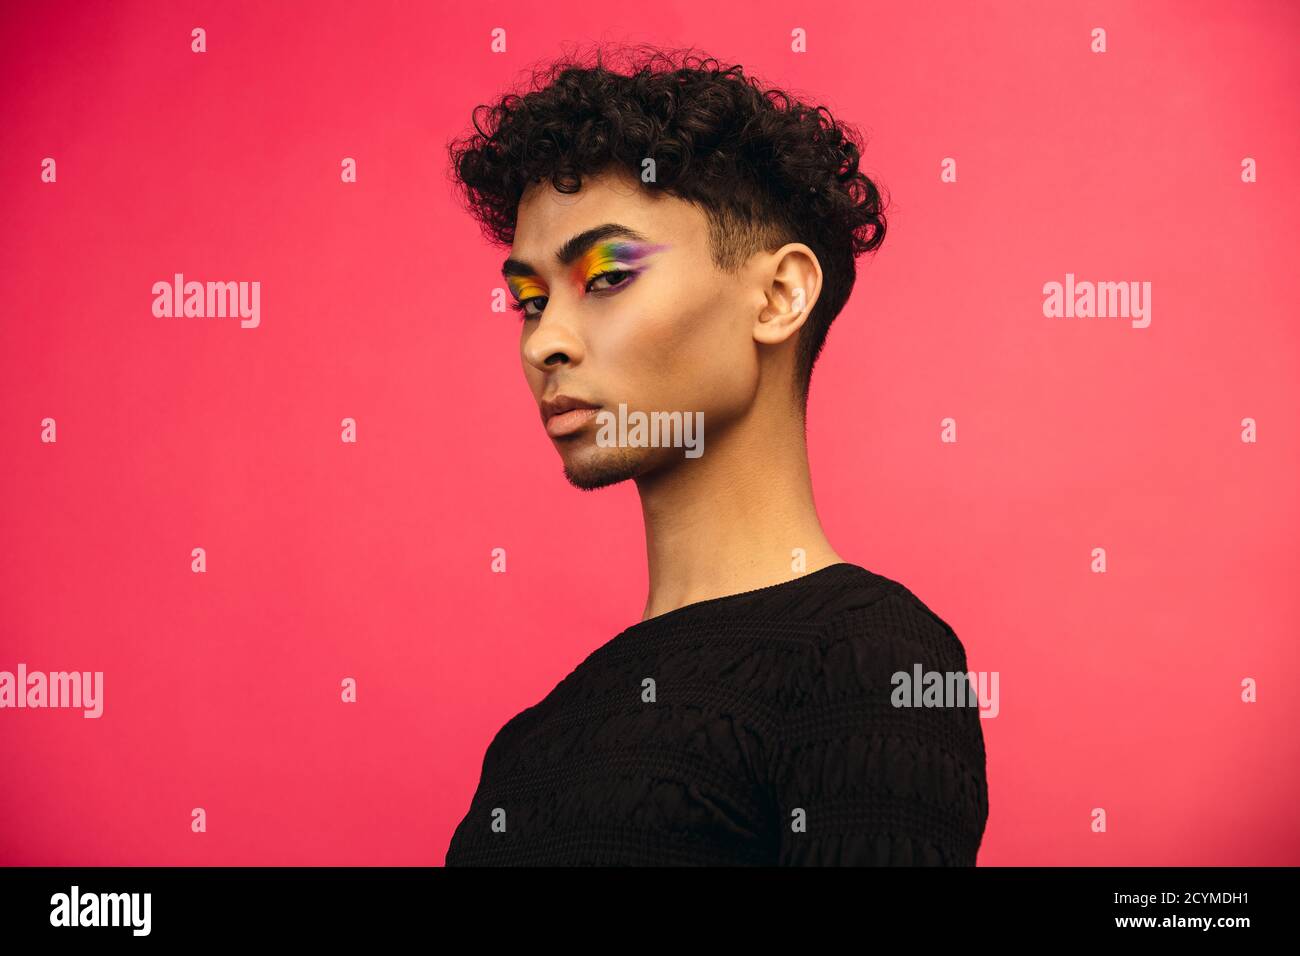 Handsome man in black t-shirt staring at camera. Androgynous man wearing black outfit and rainbow colored eye shadow against red background. Stock Photo